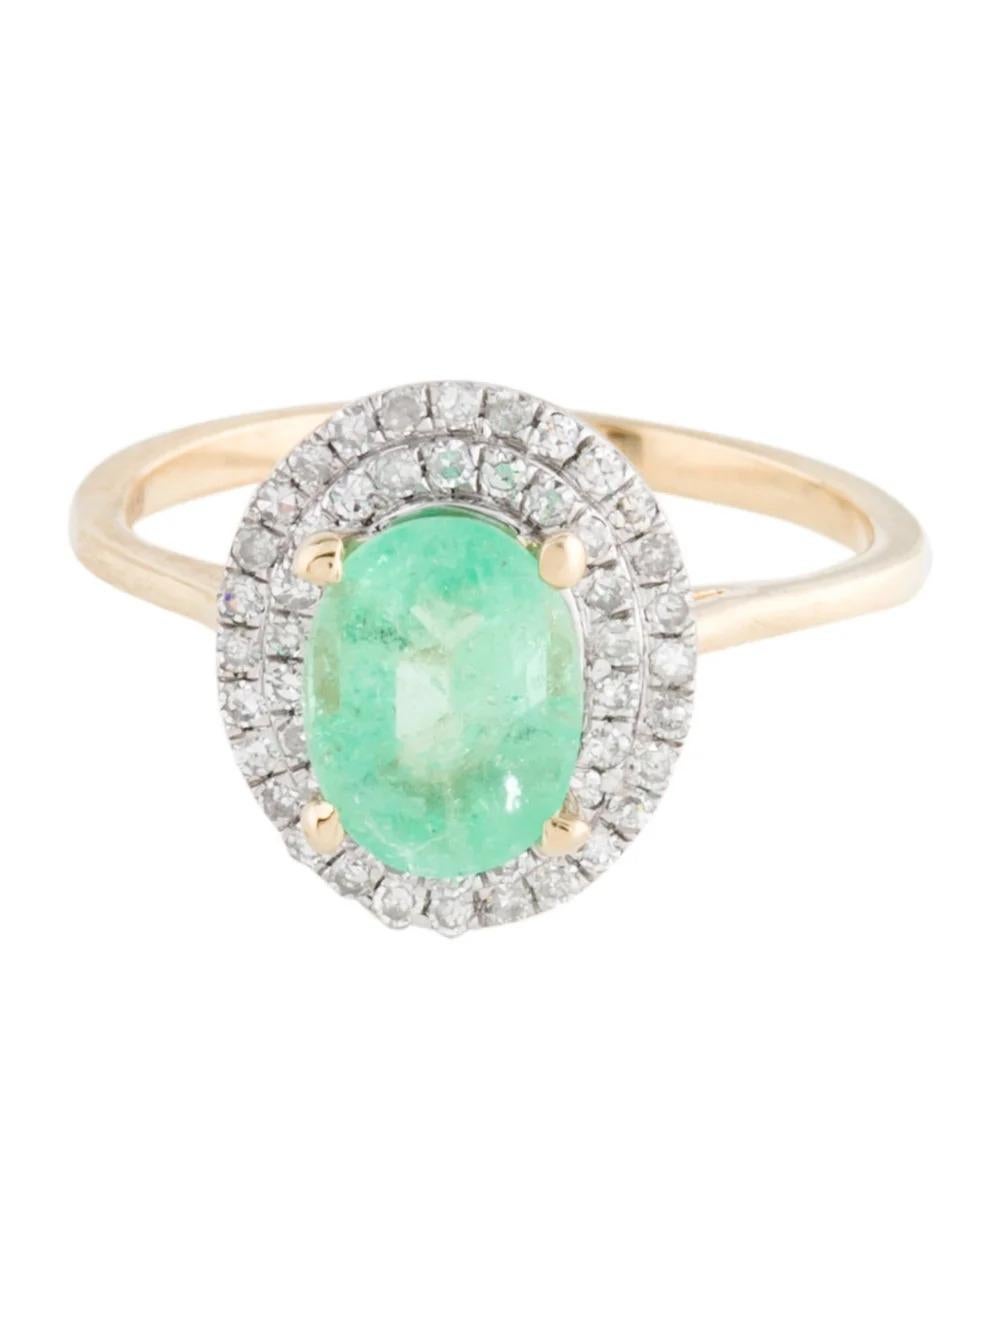 Oval Cut 14K Emerald & Diamond Cocktail Ring 1.51ctw, Size 6.5 - Statement Jewelry For Sale